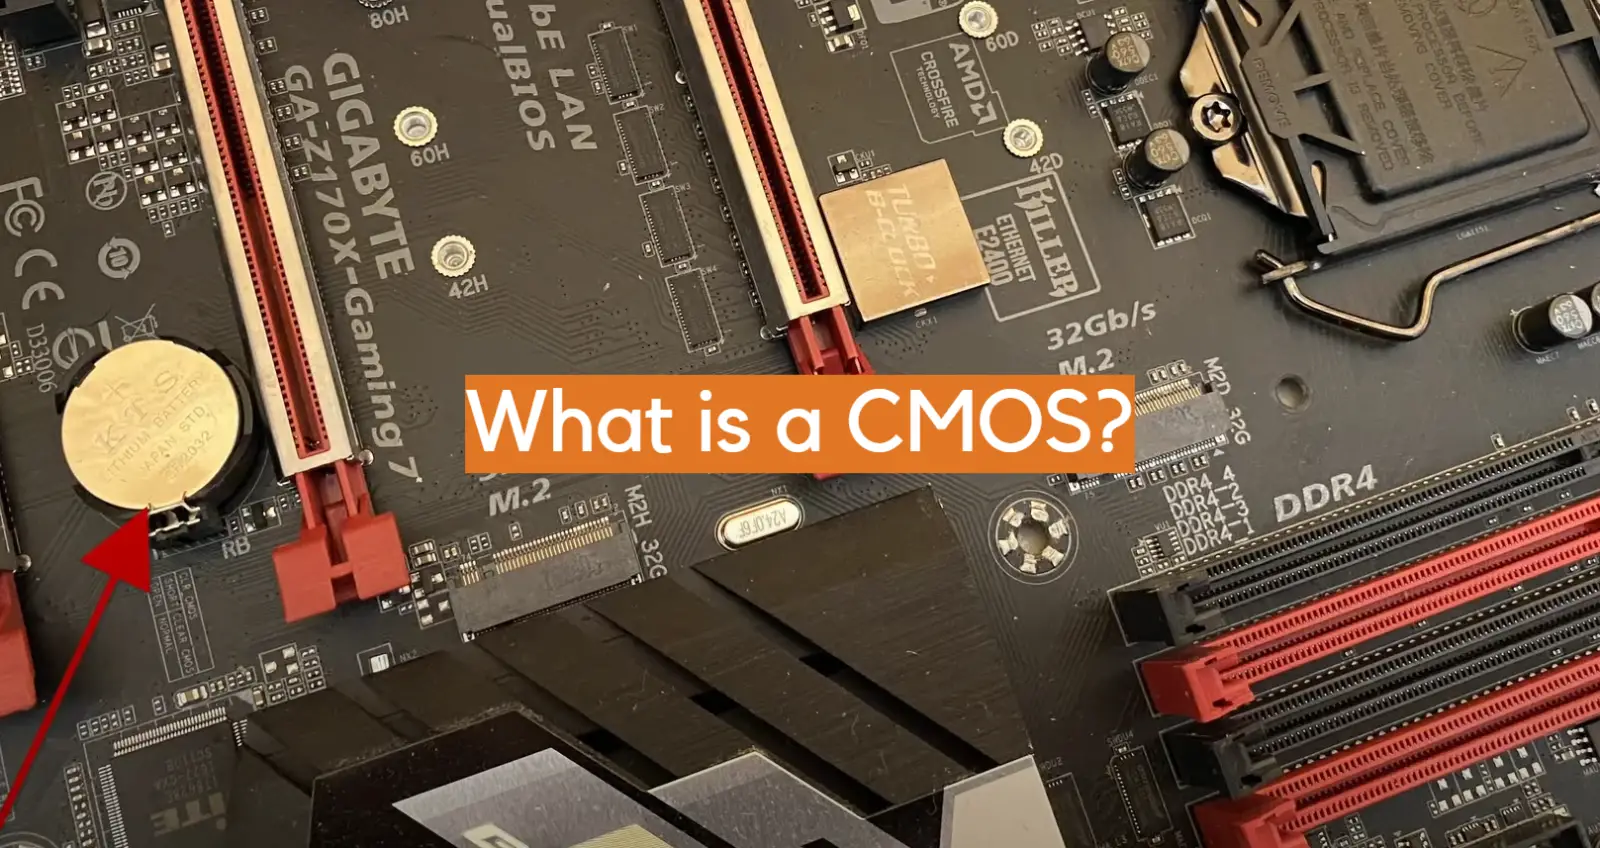 What is a CMOS?